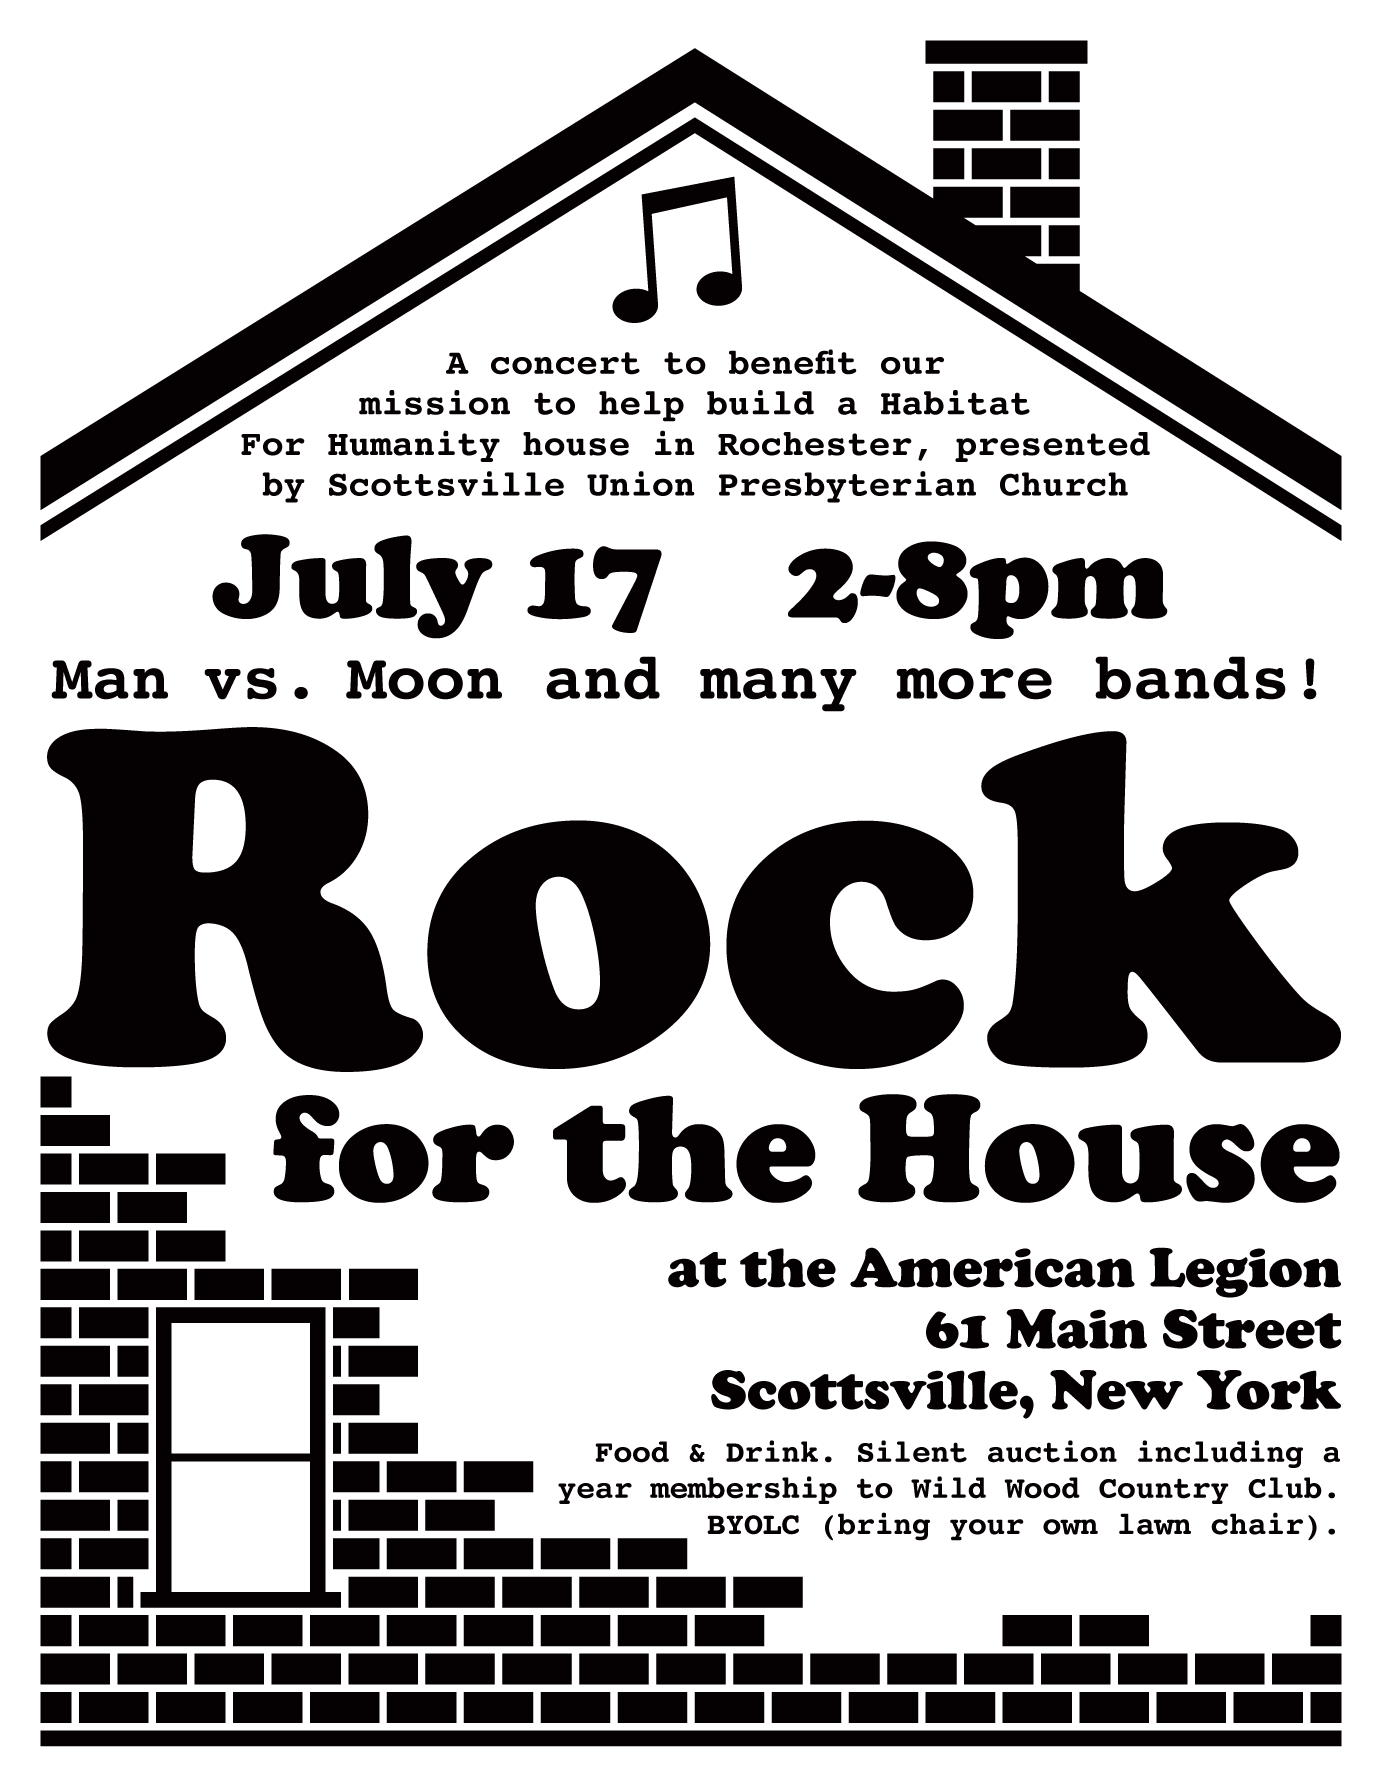 Scottsville Union Presbyterian Church presents Rock for the House July 17, 2-8 to Benefit Habitat for Humanity in Rochester